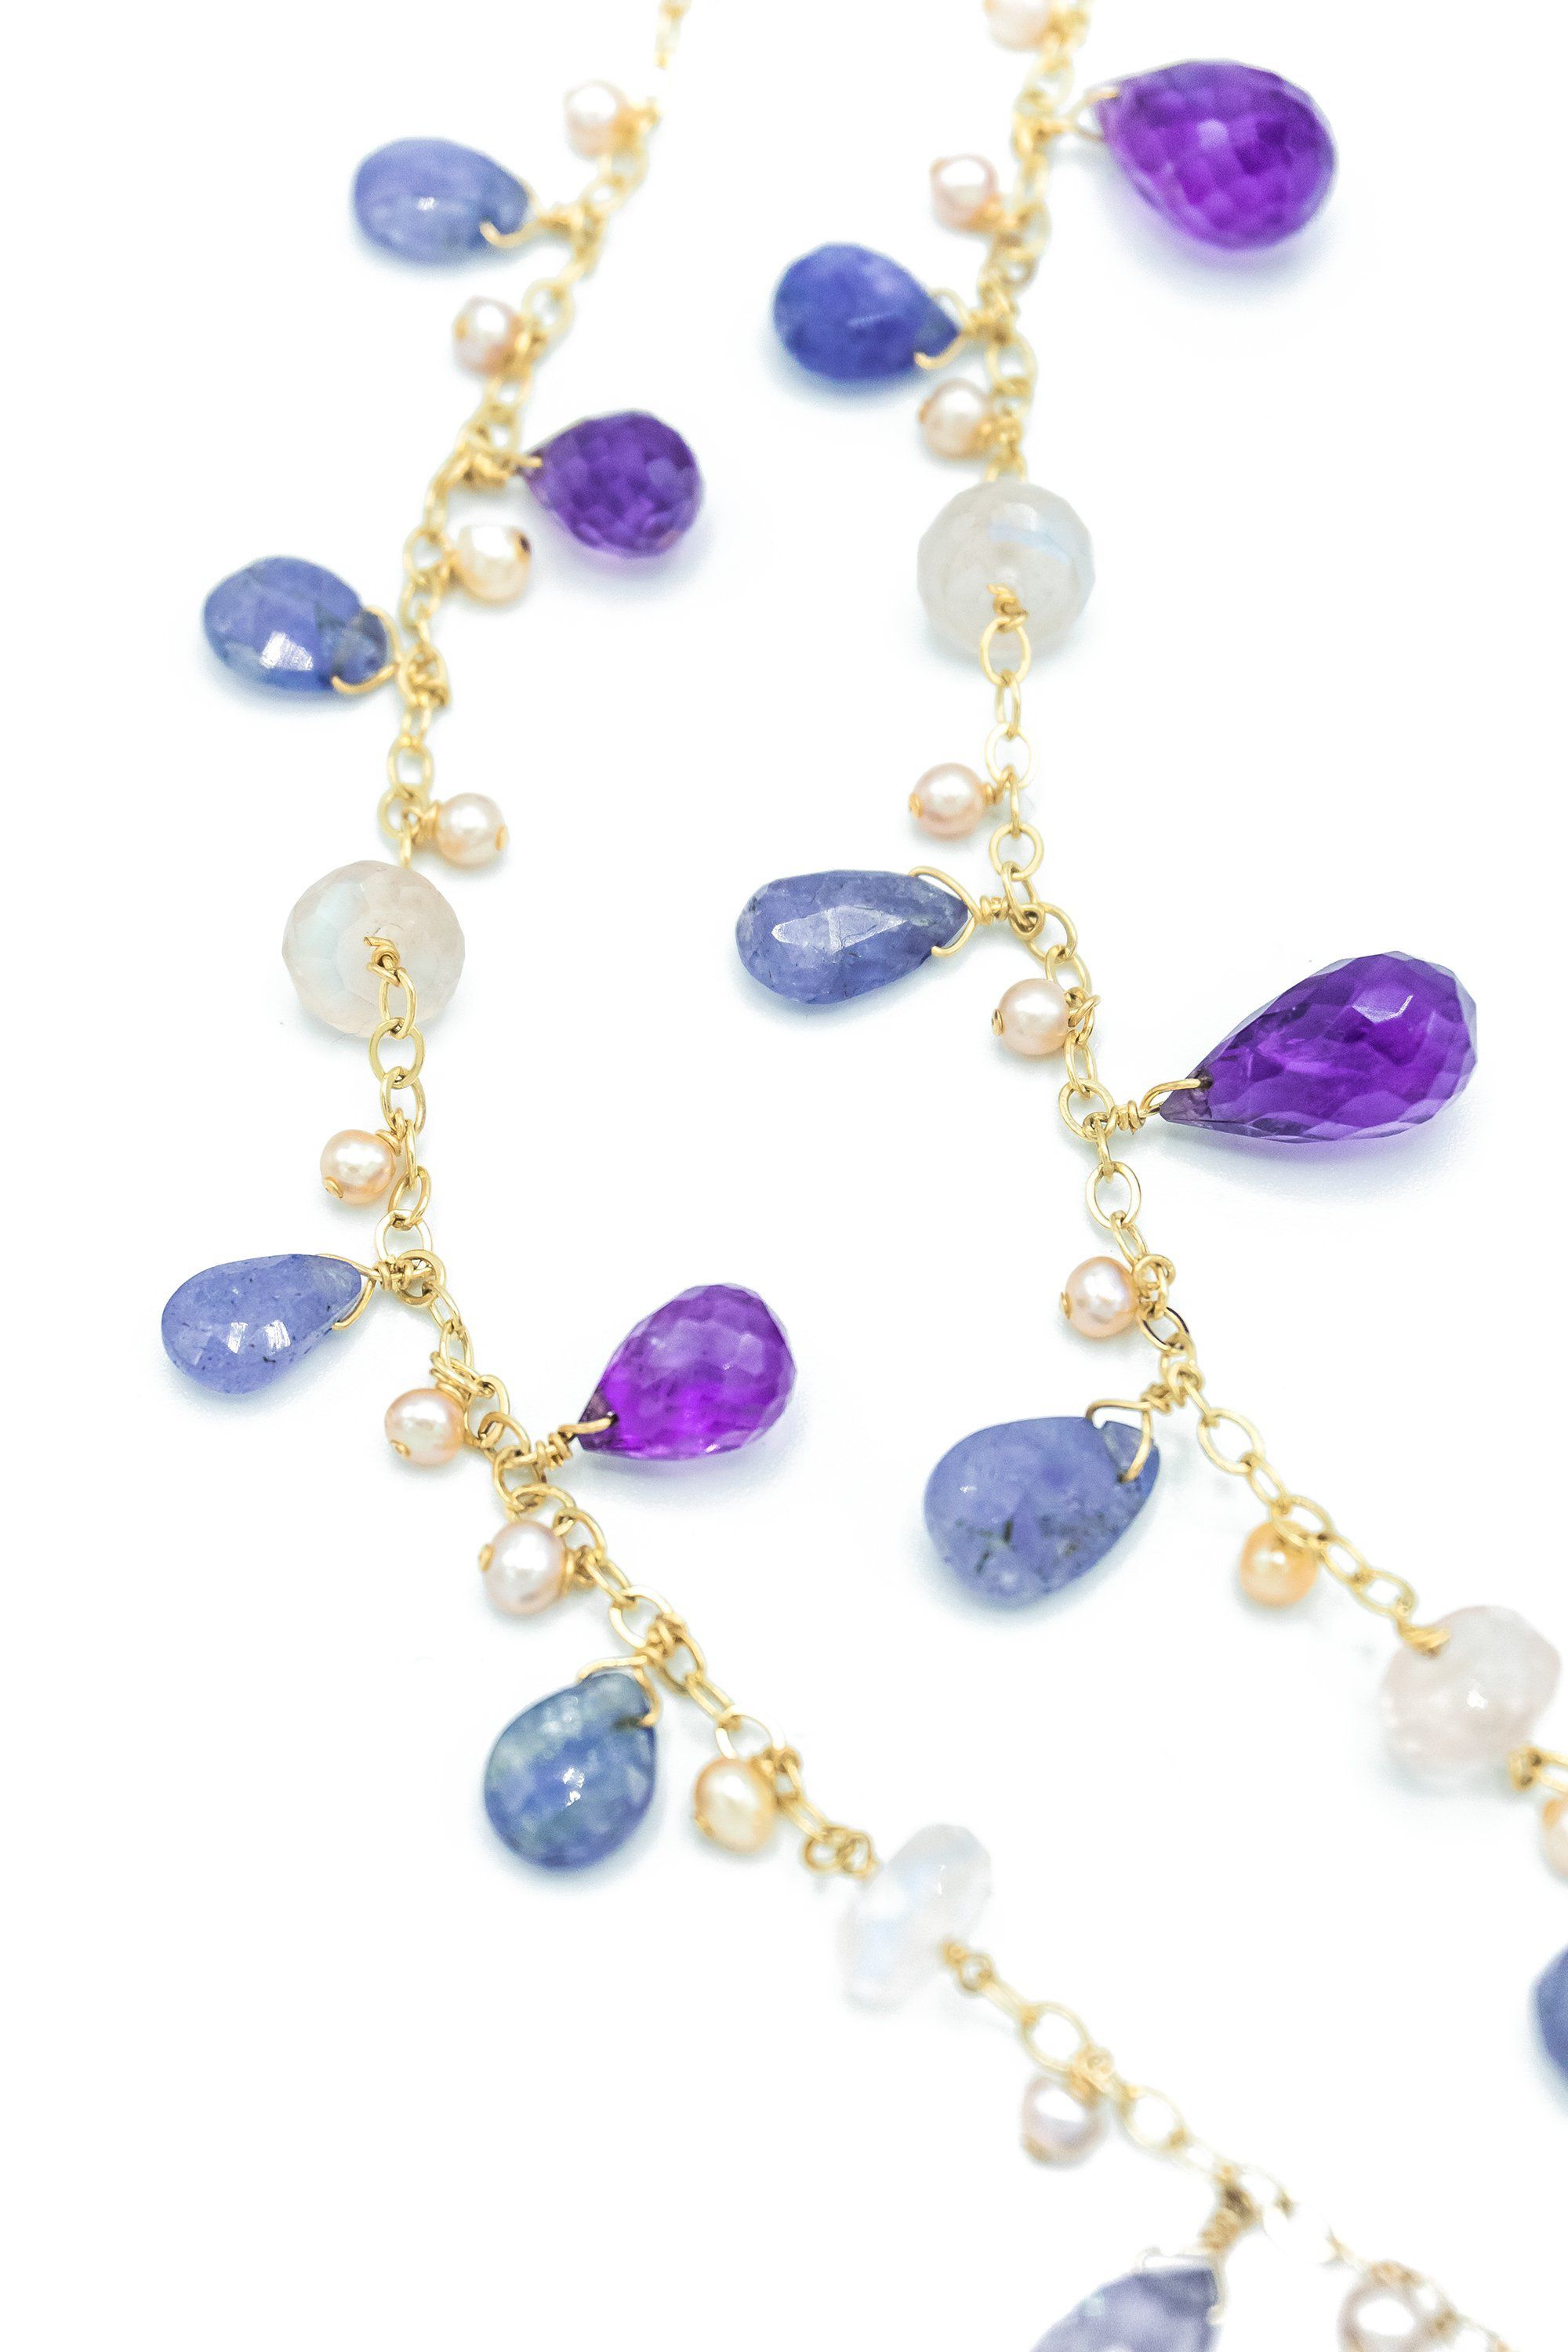 Tanzanite, Amethyst & Rose Quartz Long Chained Necklace